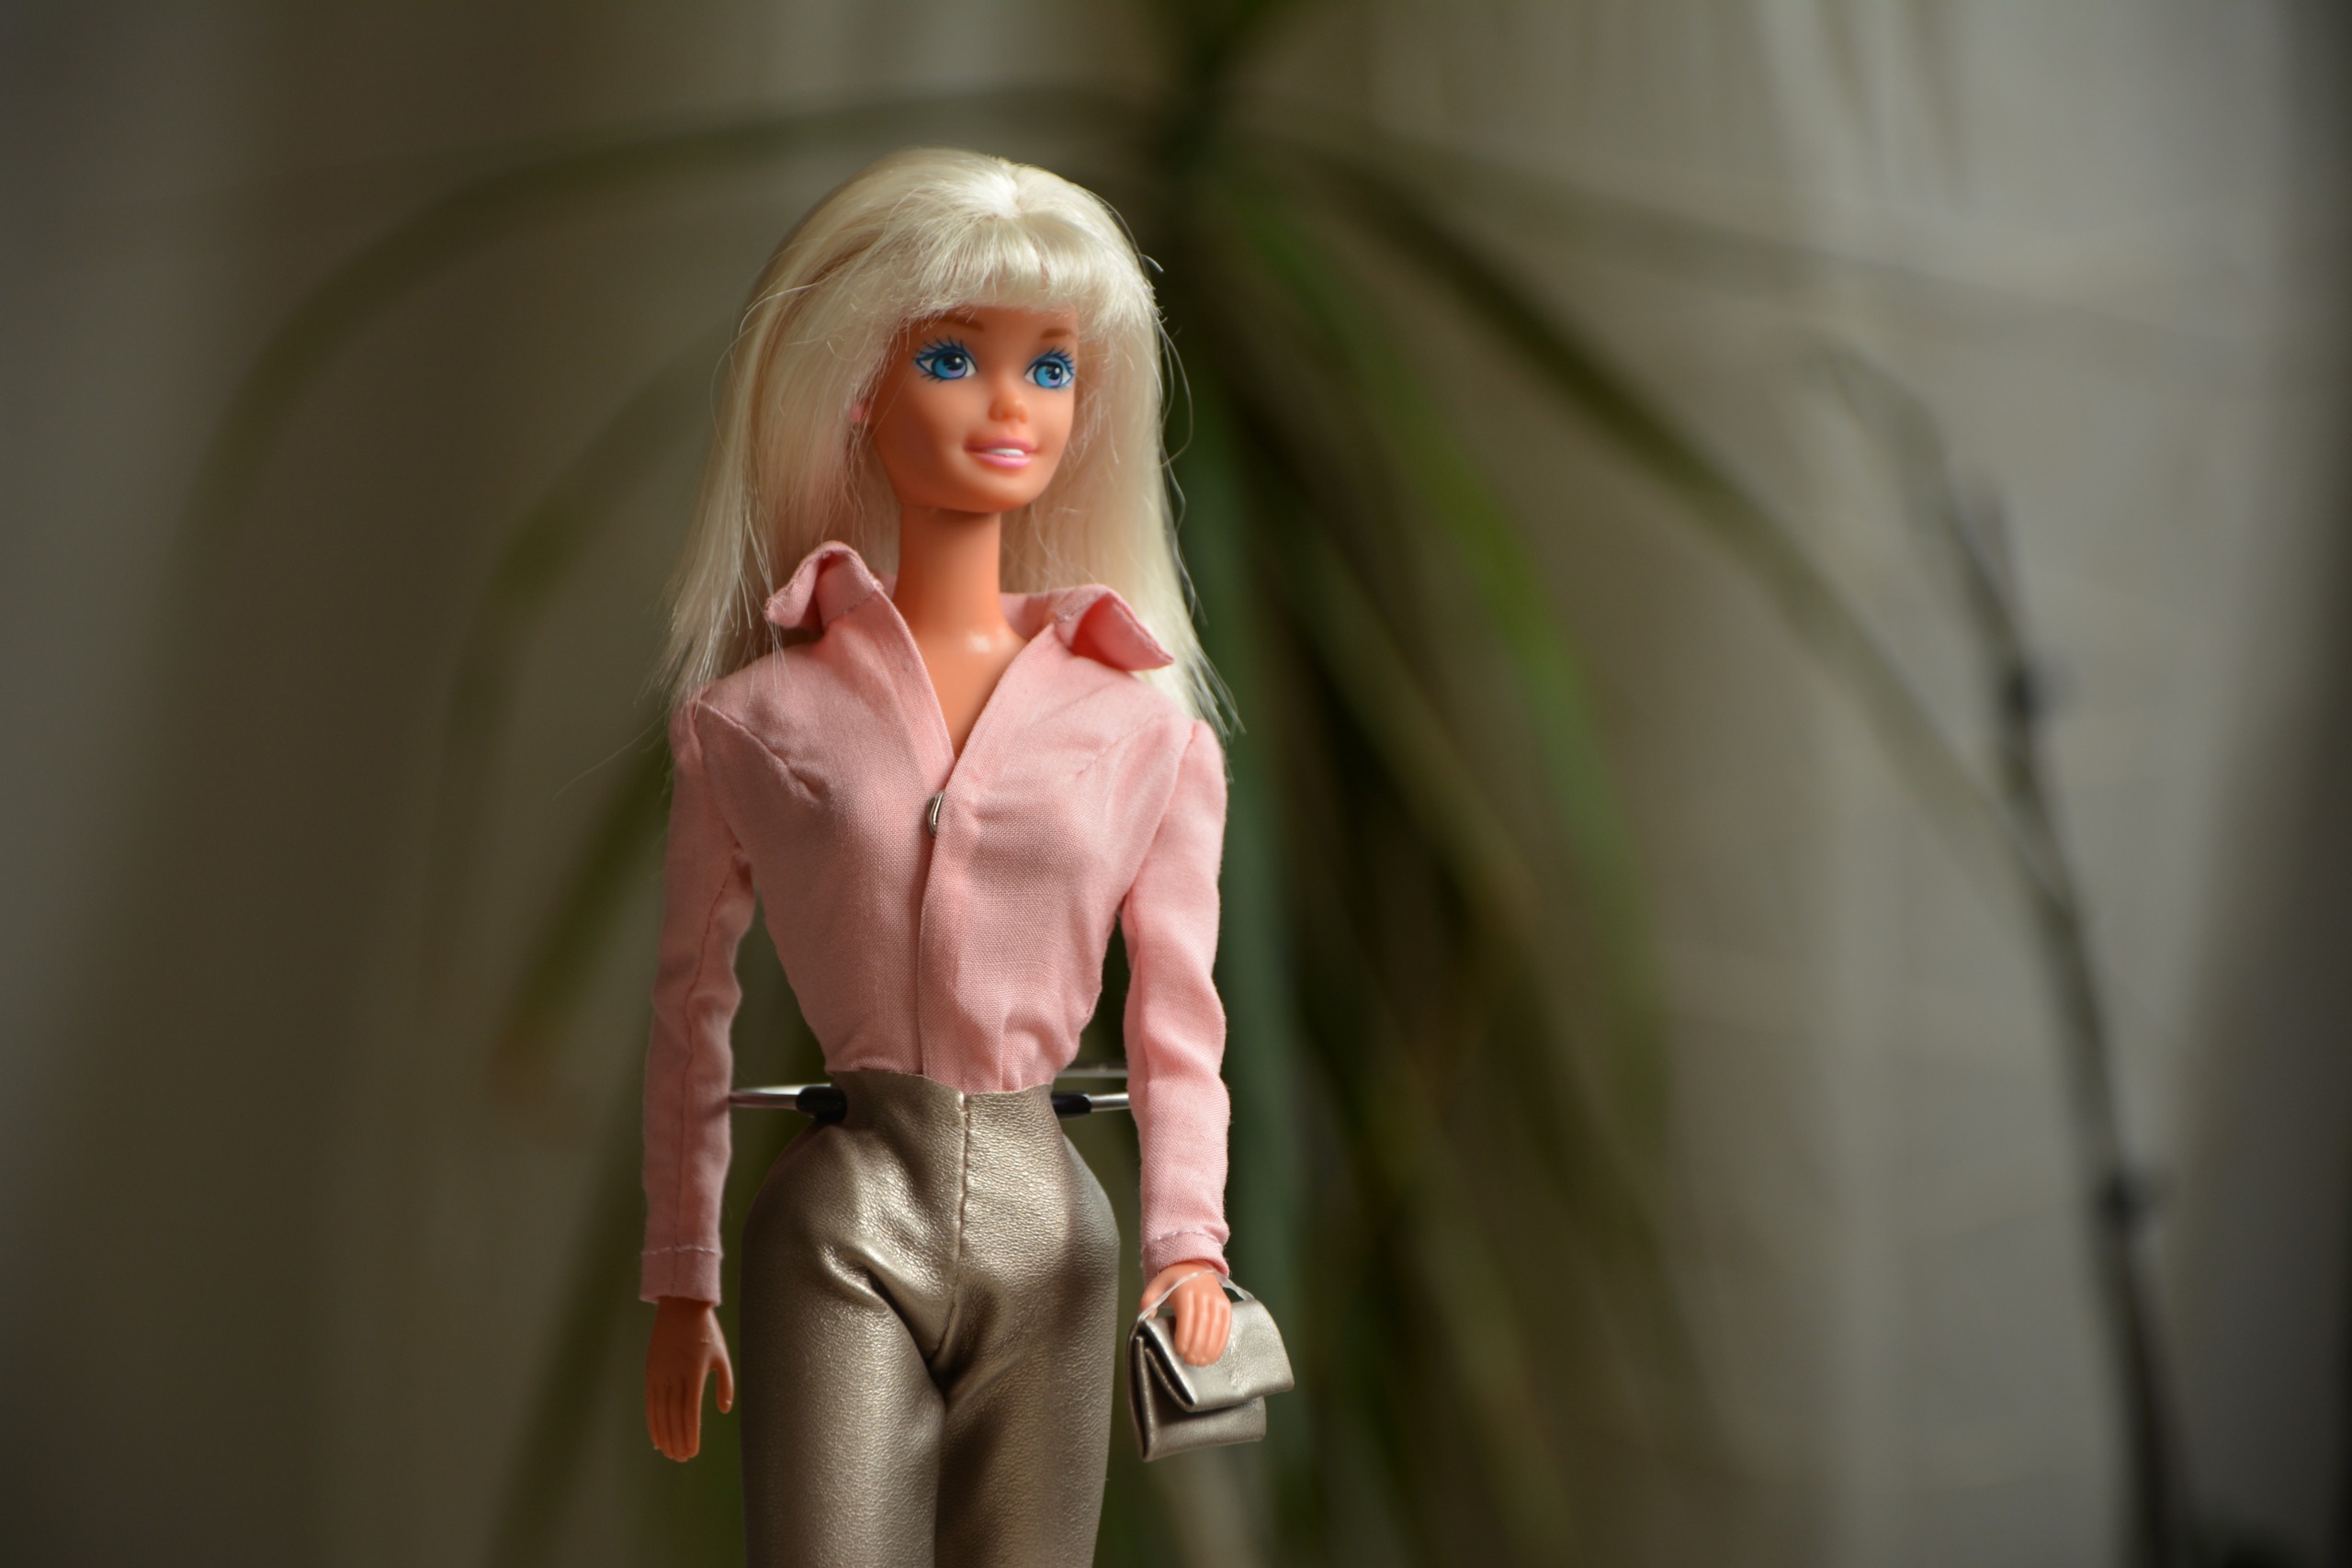 In 1963, she left Minneapolis for Mattel. She designed Barbie clothes for  35 years